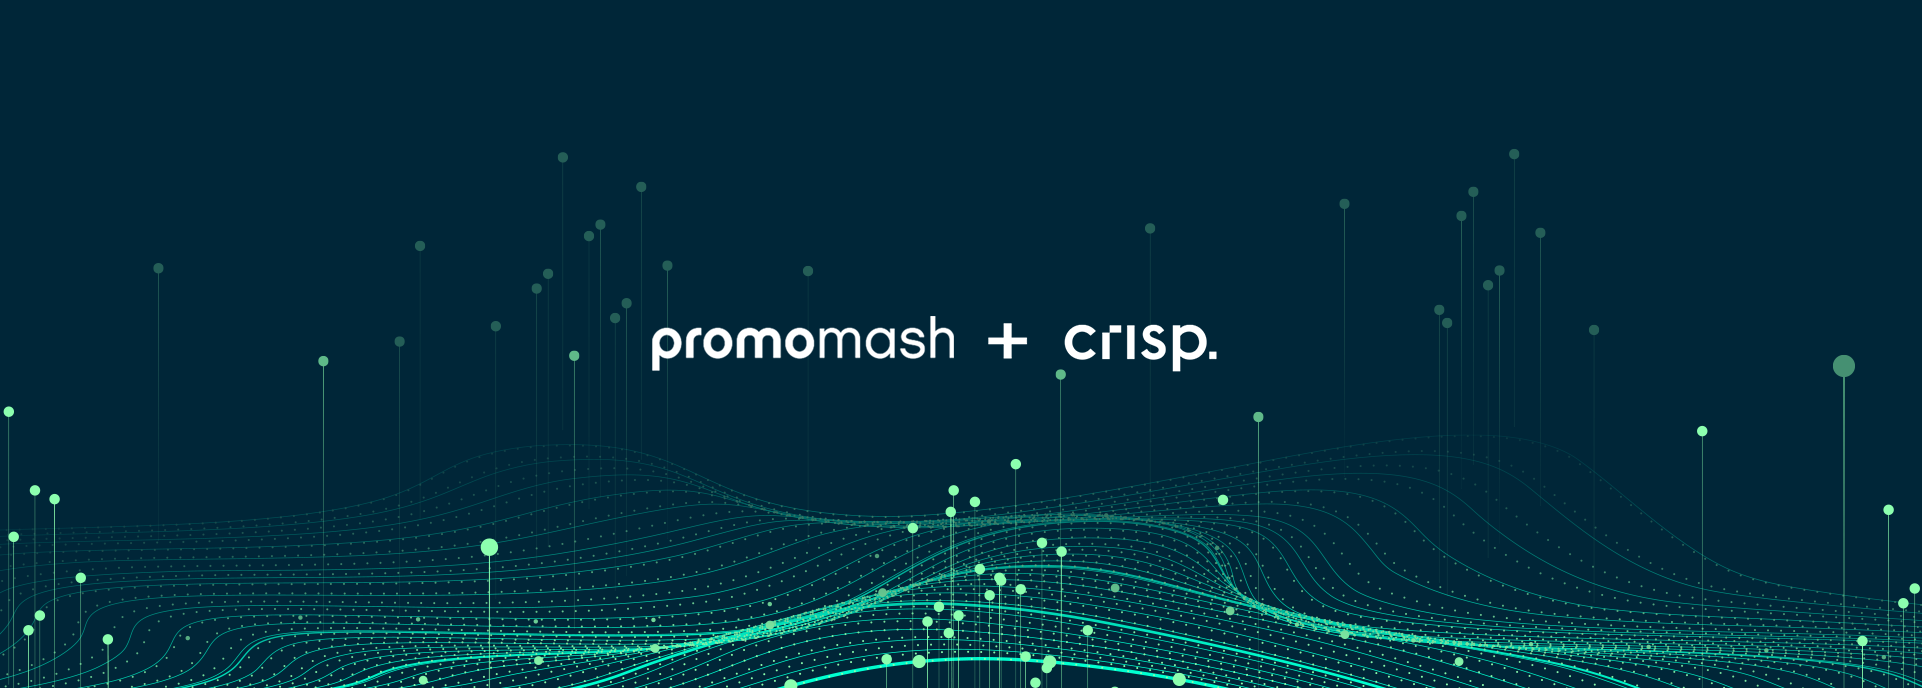 Crisp Data is Now Integrated Into Promomash. What Does This Mean for Emerging Brands? Everything.